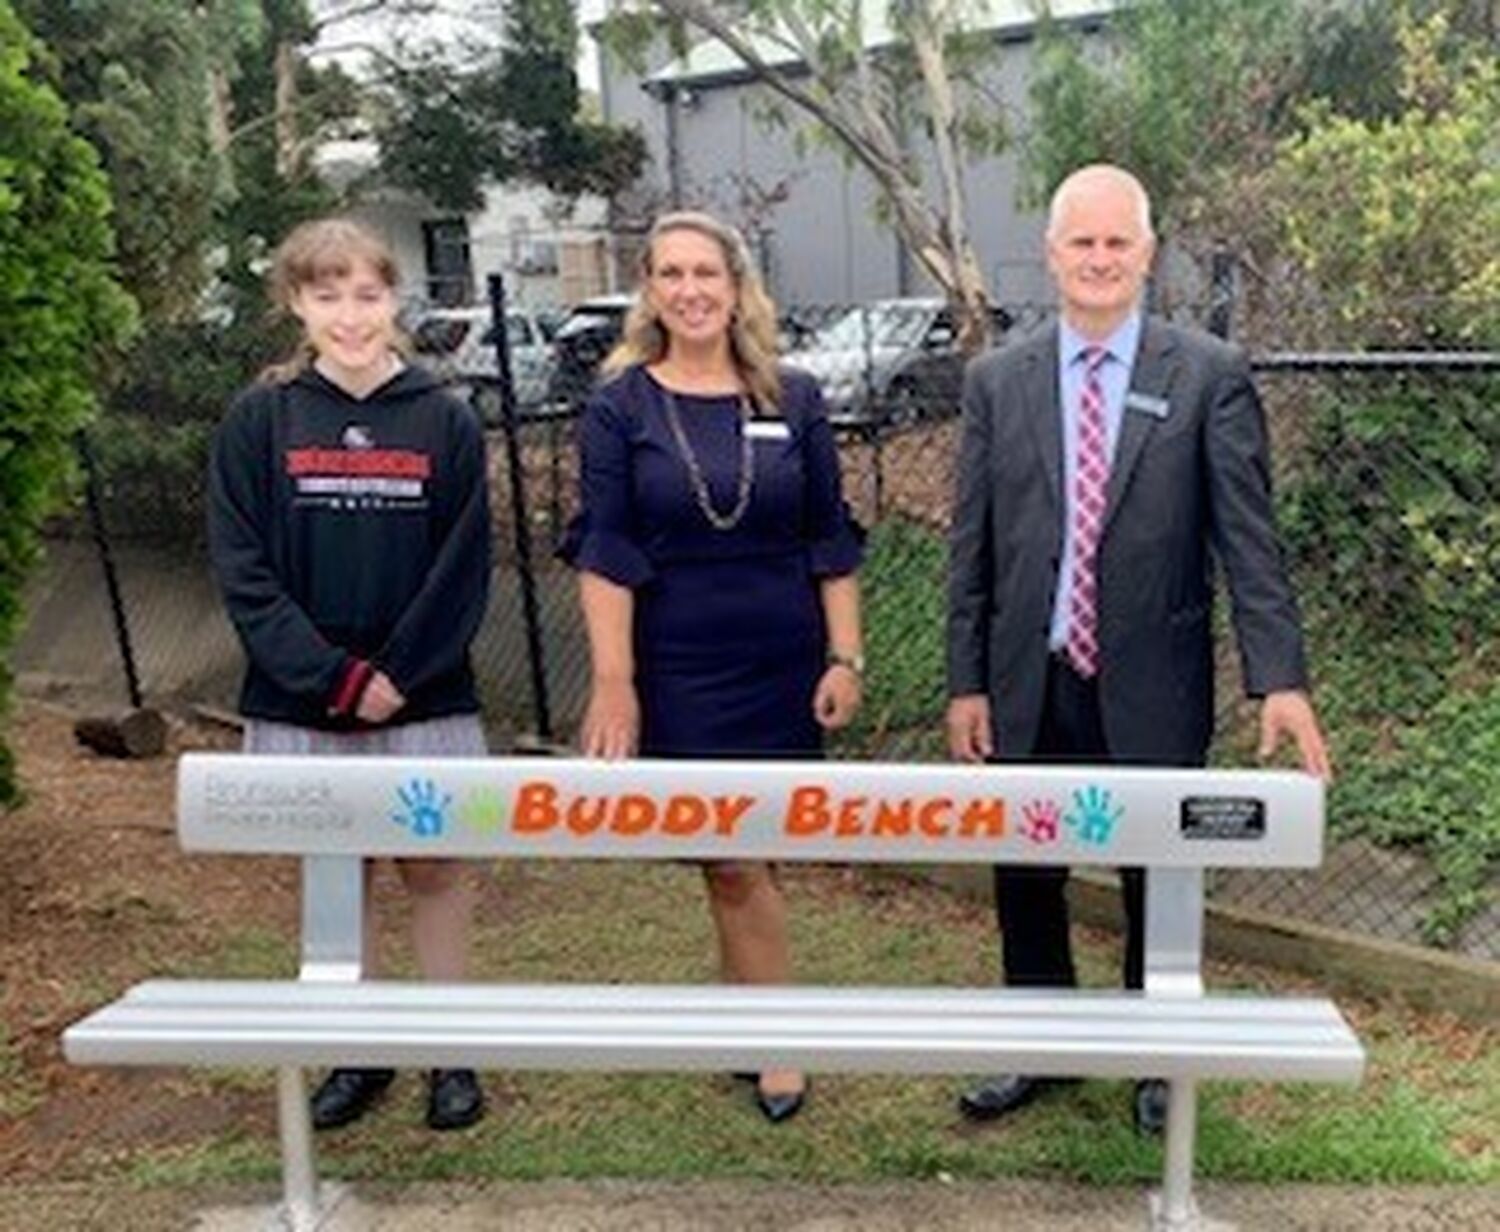 Northside Christian College Buddy Bench With Suzy